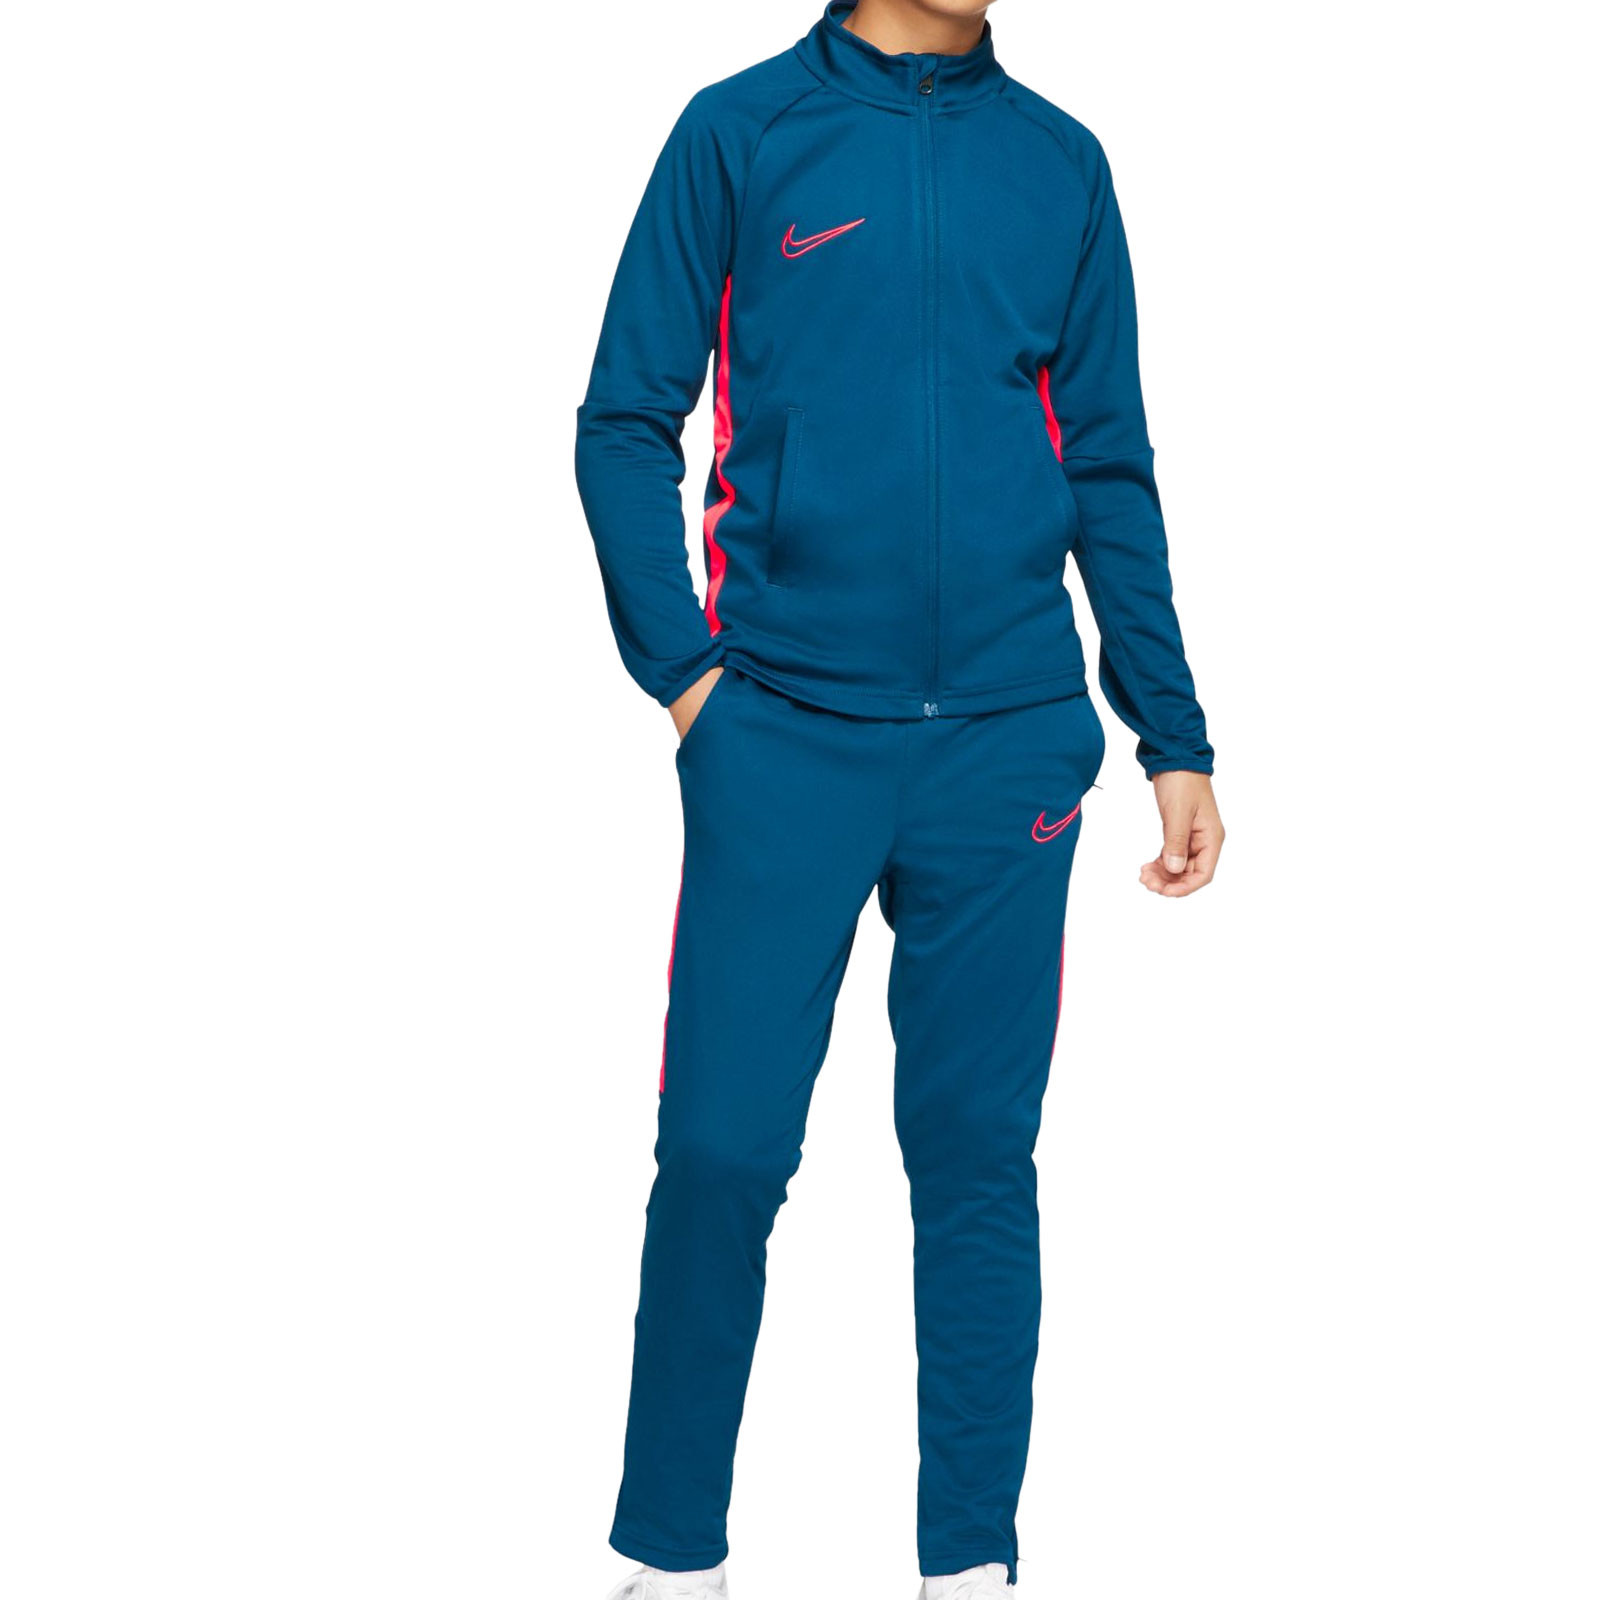 chandal nike dry fit for sale 3f1a0 74f47